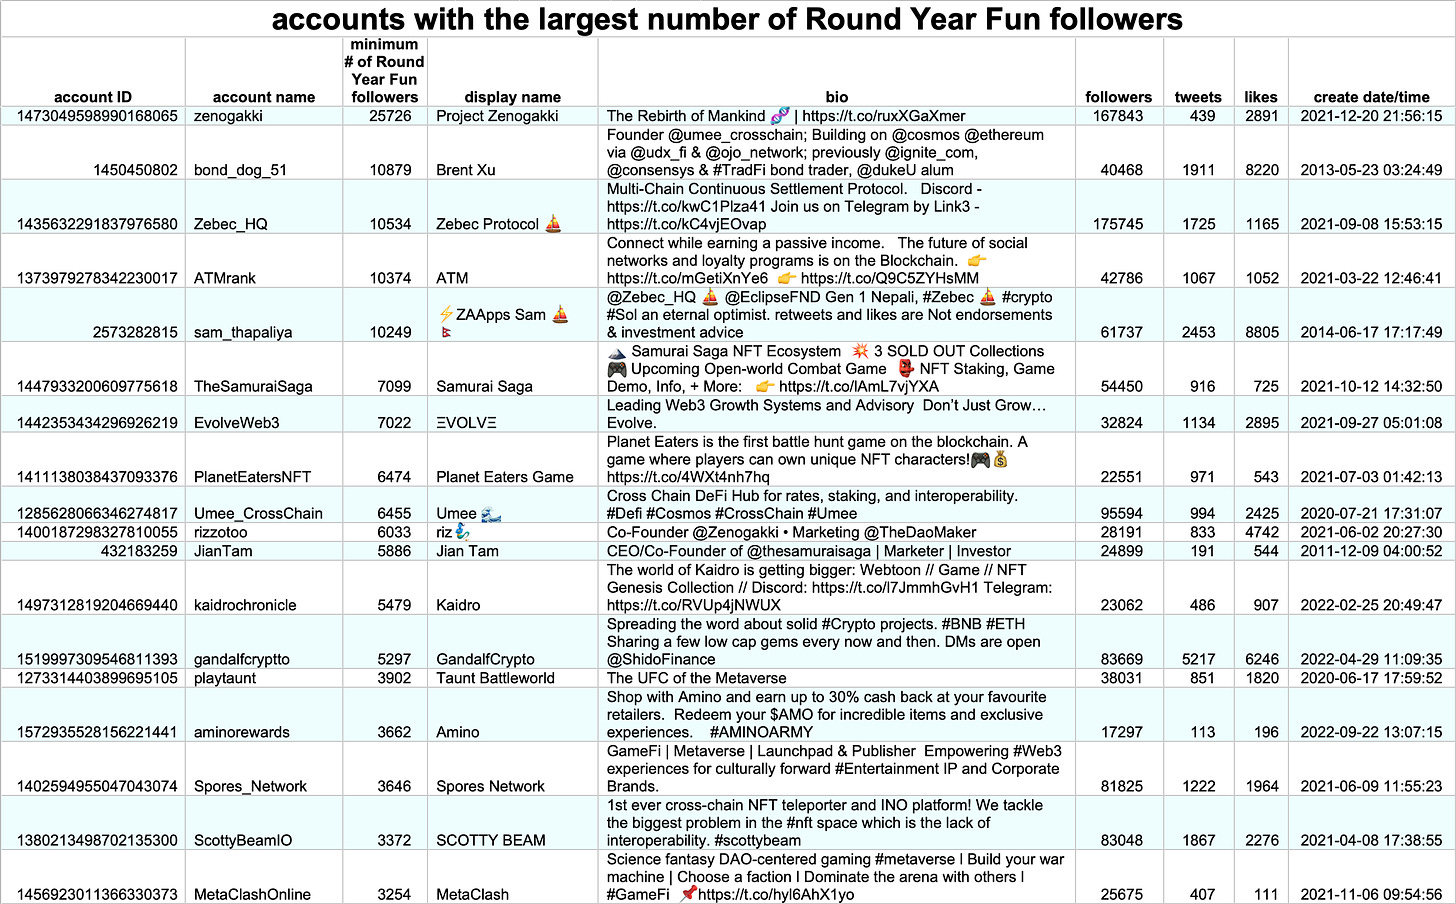 table of accounts with the largest number of Round Year Fun followers